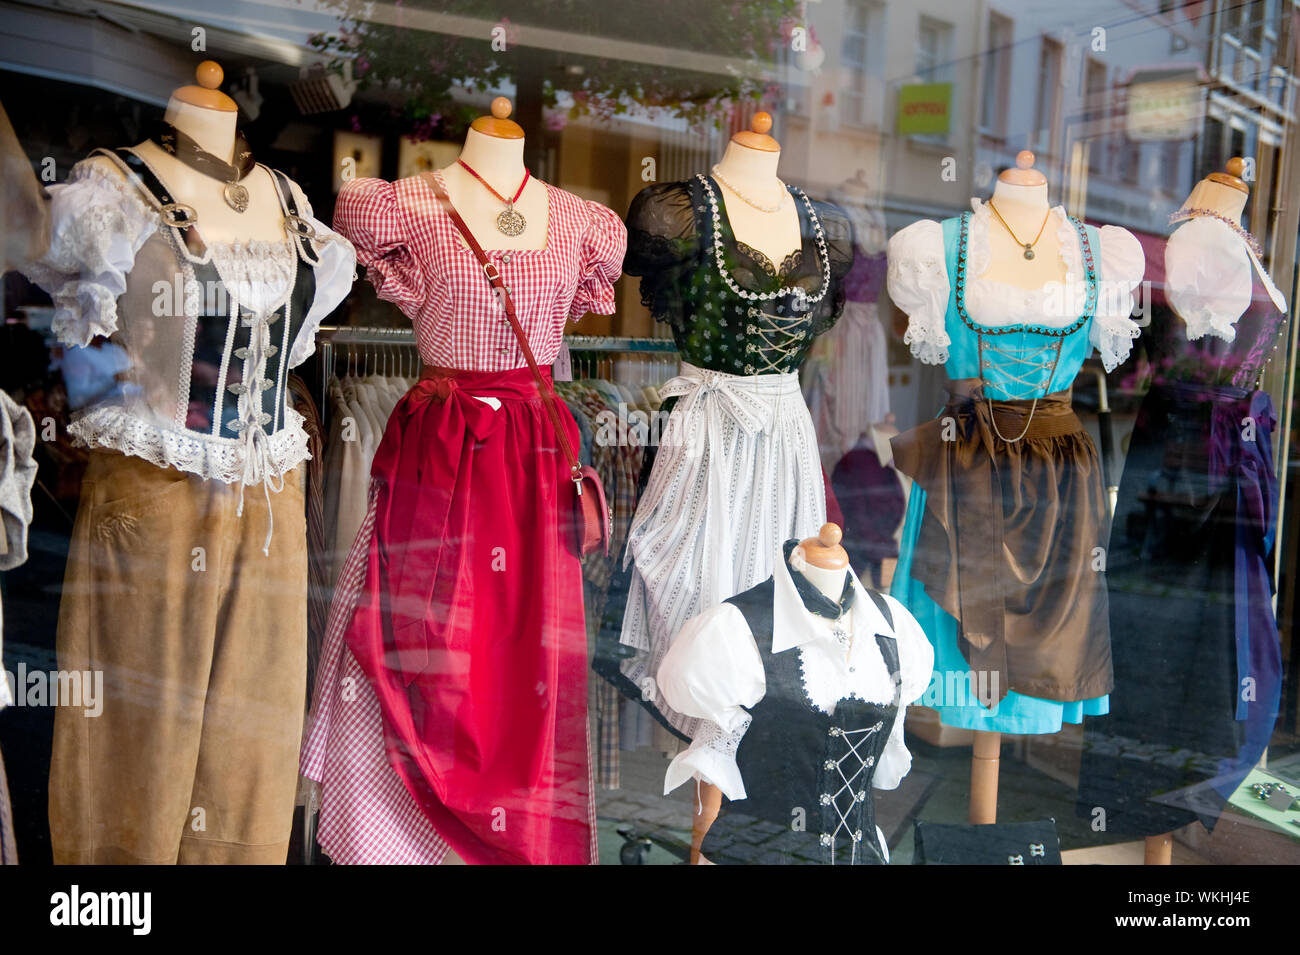 German Traditional Dress For Women